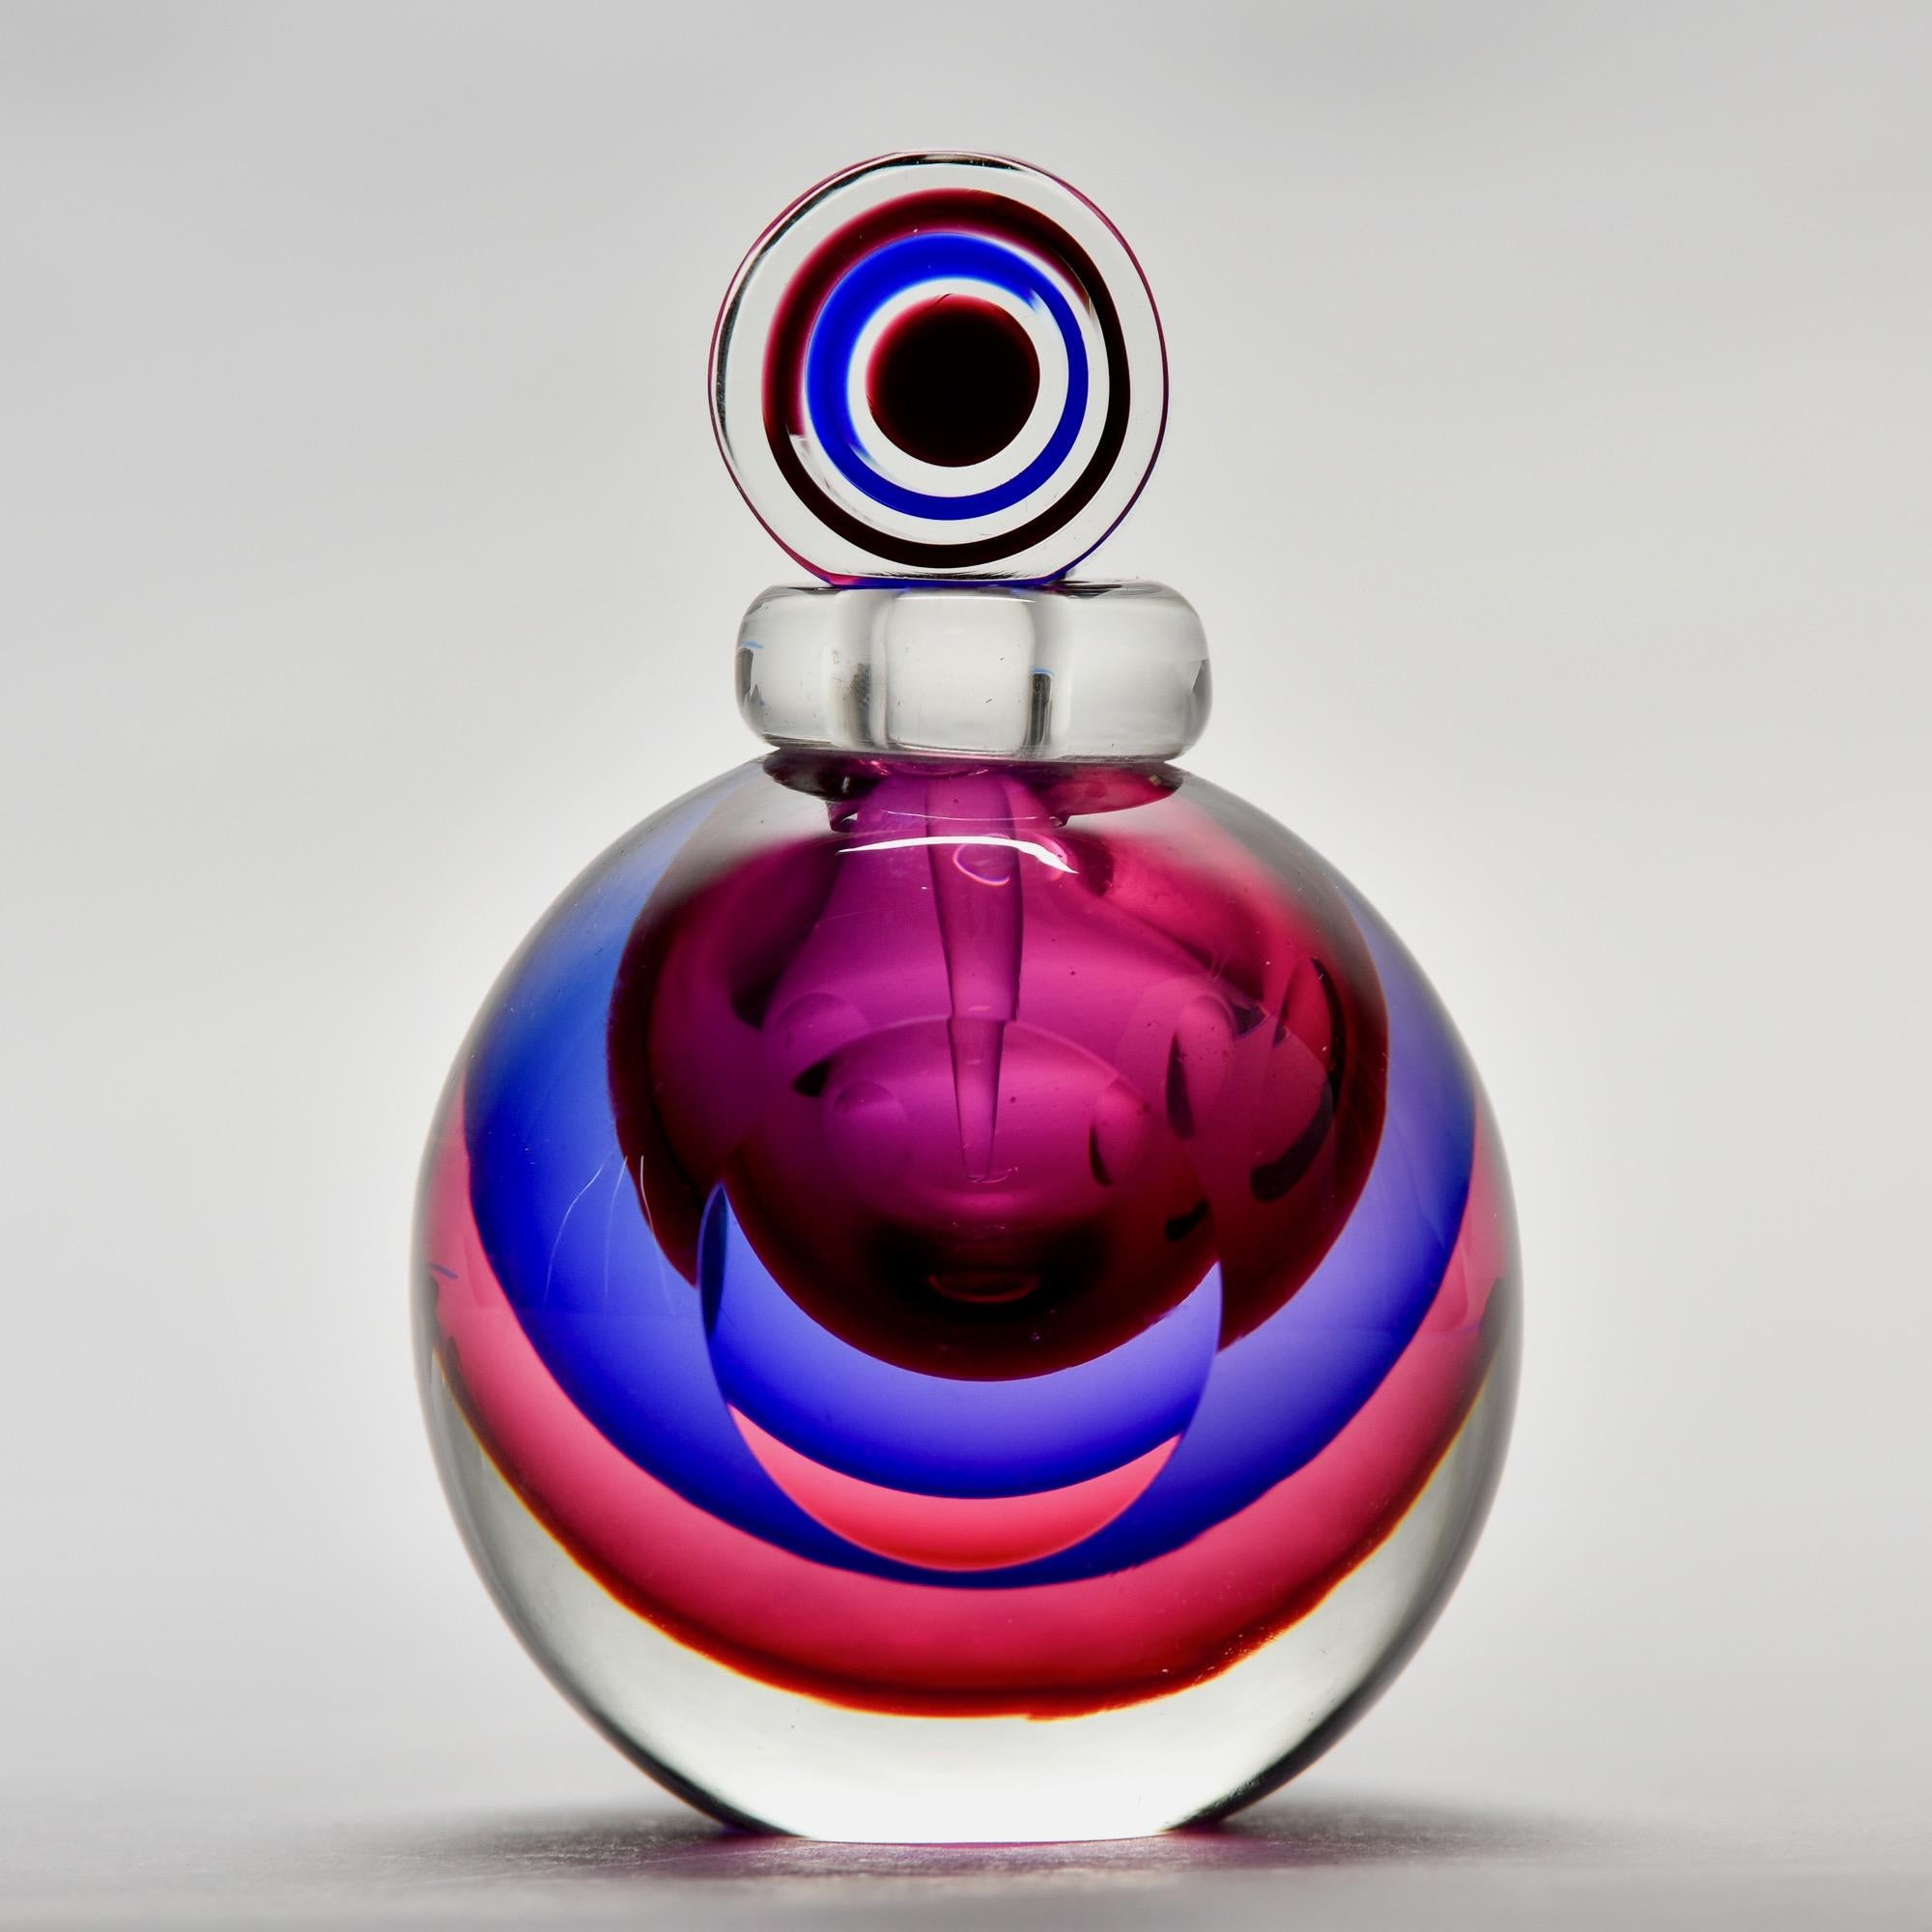 New Murano glass round perfume bottle features heavy, clear class with sommerso-style jewel-toned layers of fuchsia, violet and berry. Top has a scent dabber. Unsigned. 

New with no flaws found.
  